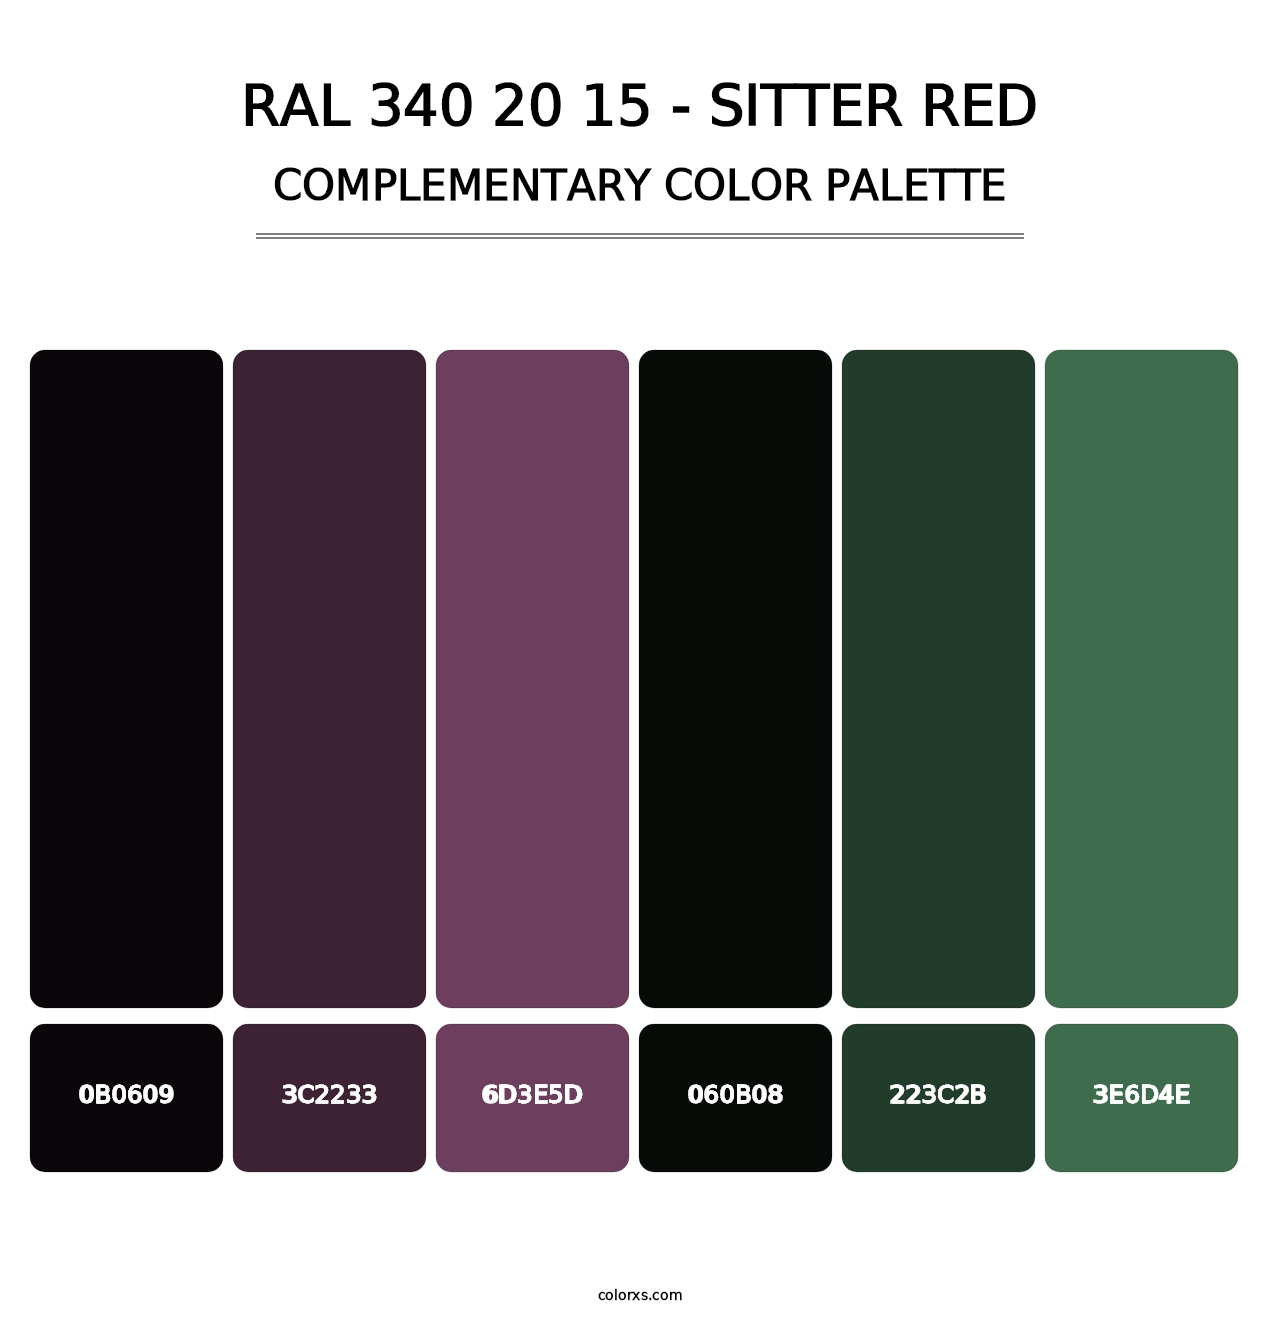 RAL 340 20 15 - Sitter Red - Complementary Color Palette